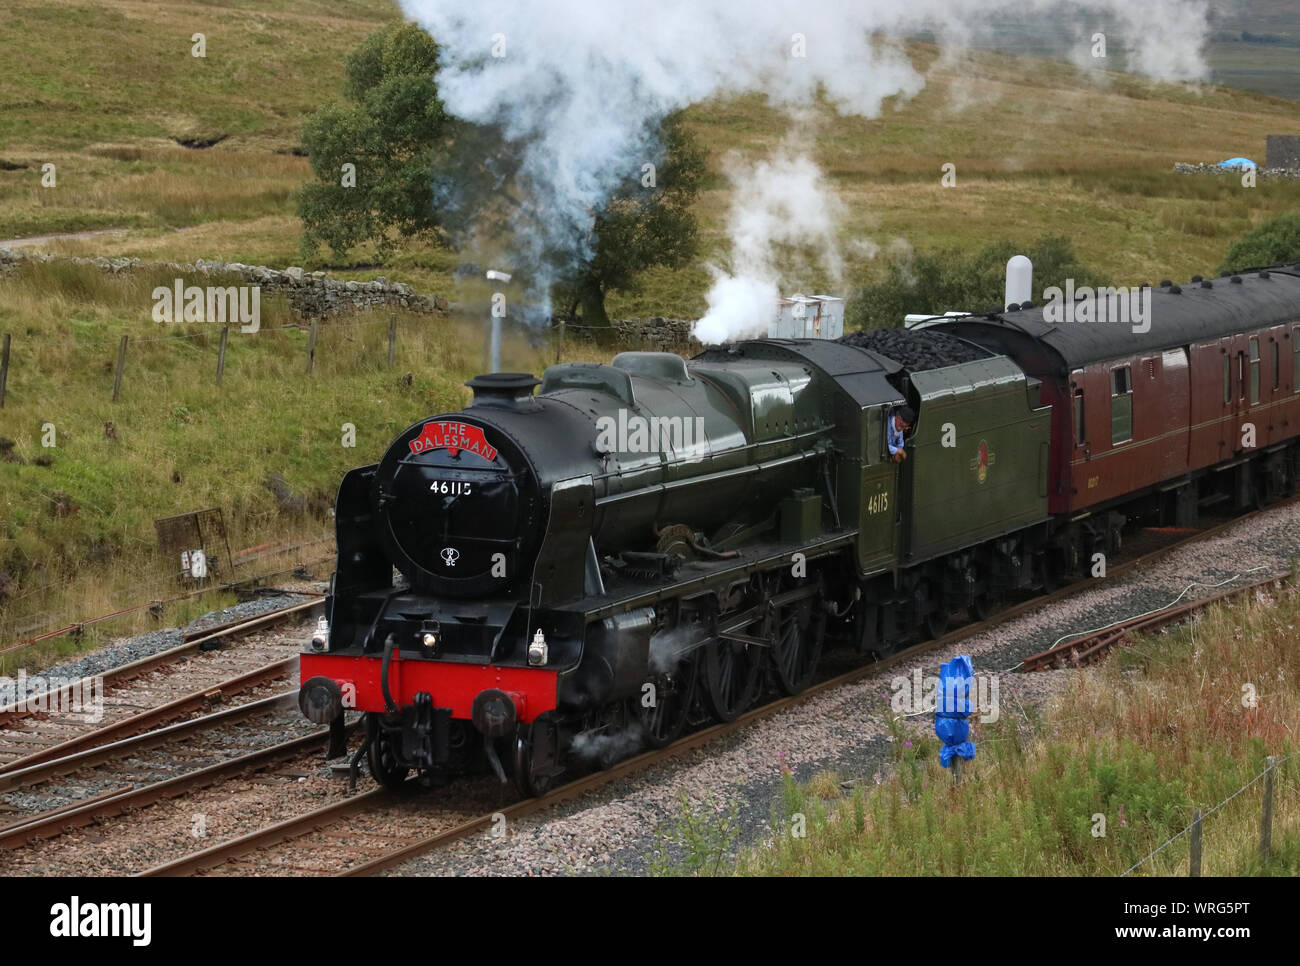 Royal Scot class steam locomotive Scots Guardsman near Blea Moor signal box on Settle to Carlisle railway line with the Dalesman on 10th Sept 2019. Stock Photo